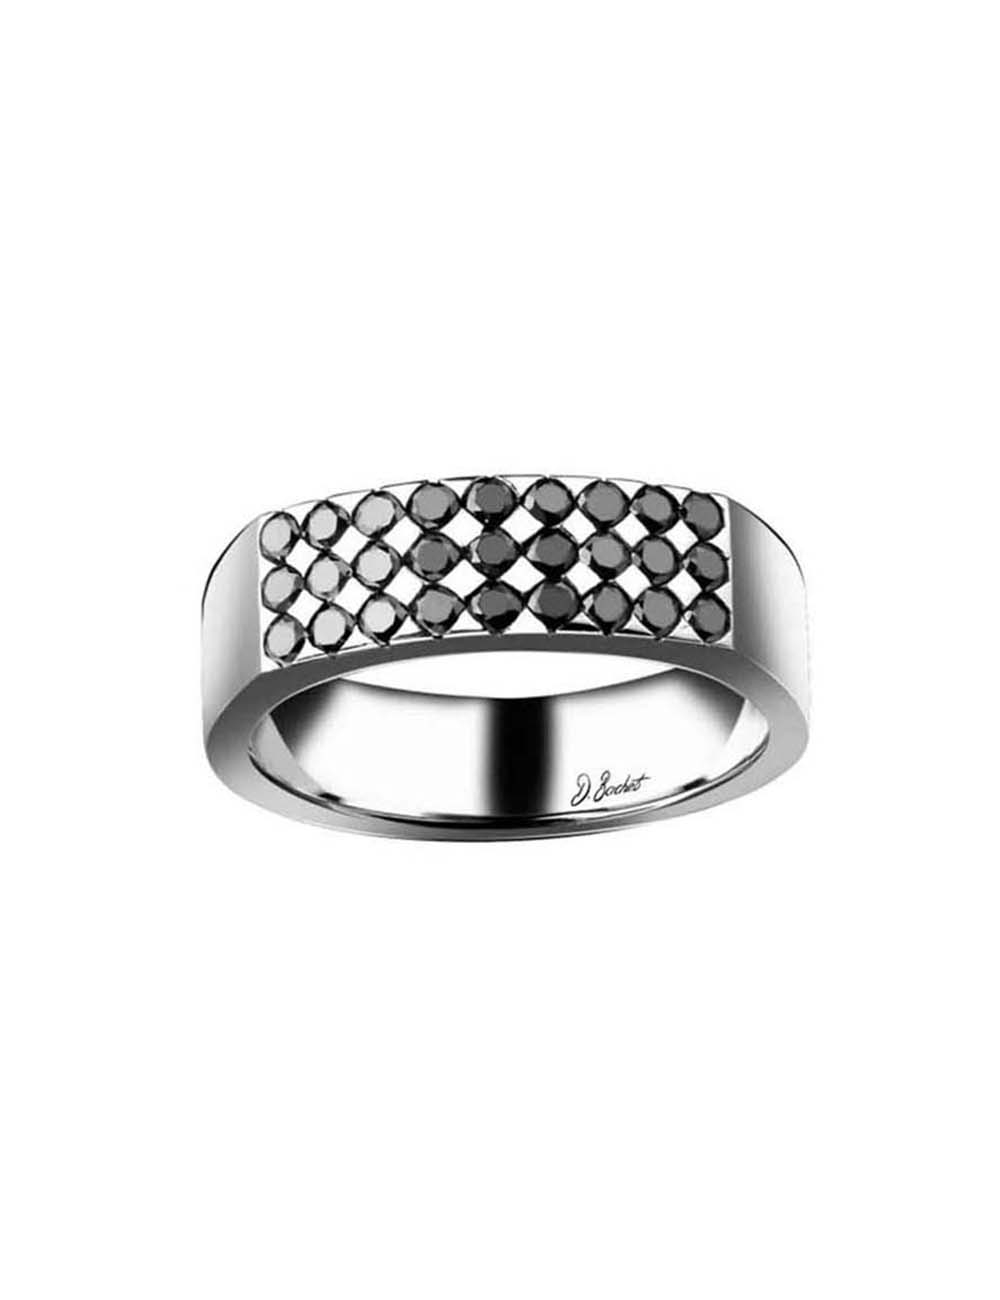 Platinum 'Mystérieux' signet ring with 27 black diamonds, unique style for the bold and elegant man.